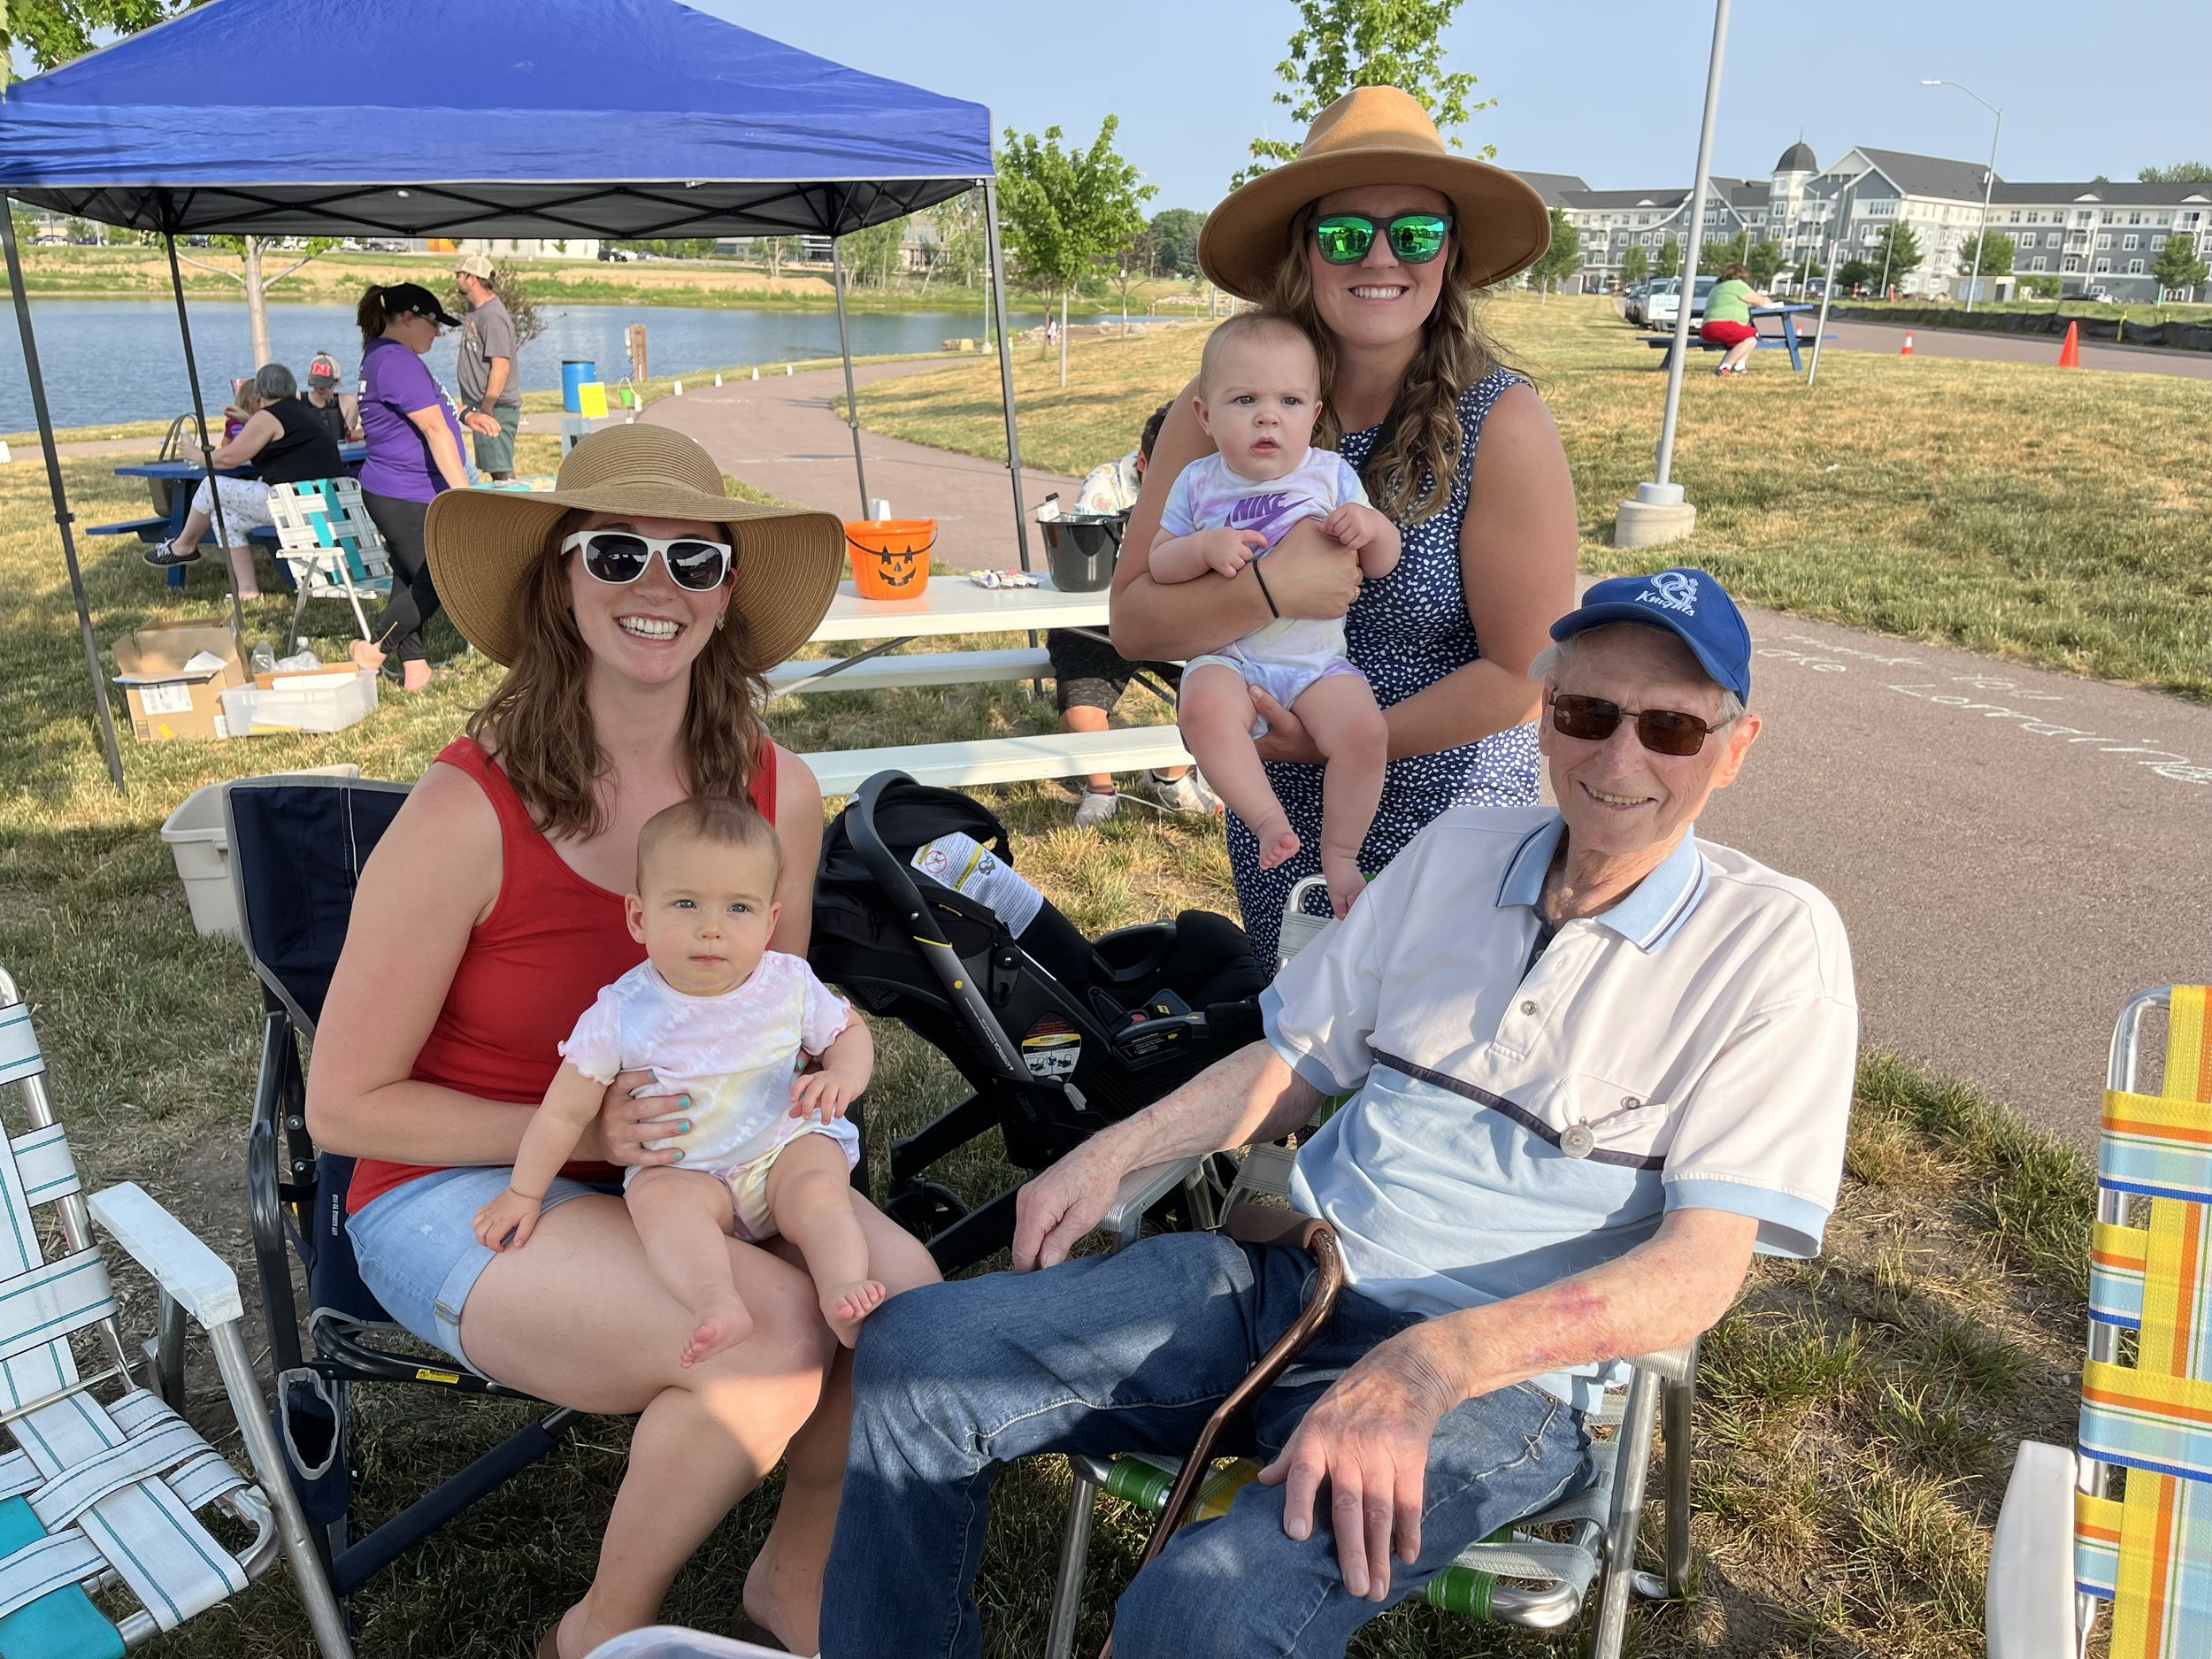  Visiting with granddaughter Katie Loomis, great-granddaughter Riley, granddaughter-in-law Jamie Monnin and great-grandaughter Ellie at an Alzheimer's Association event at the lake.  